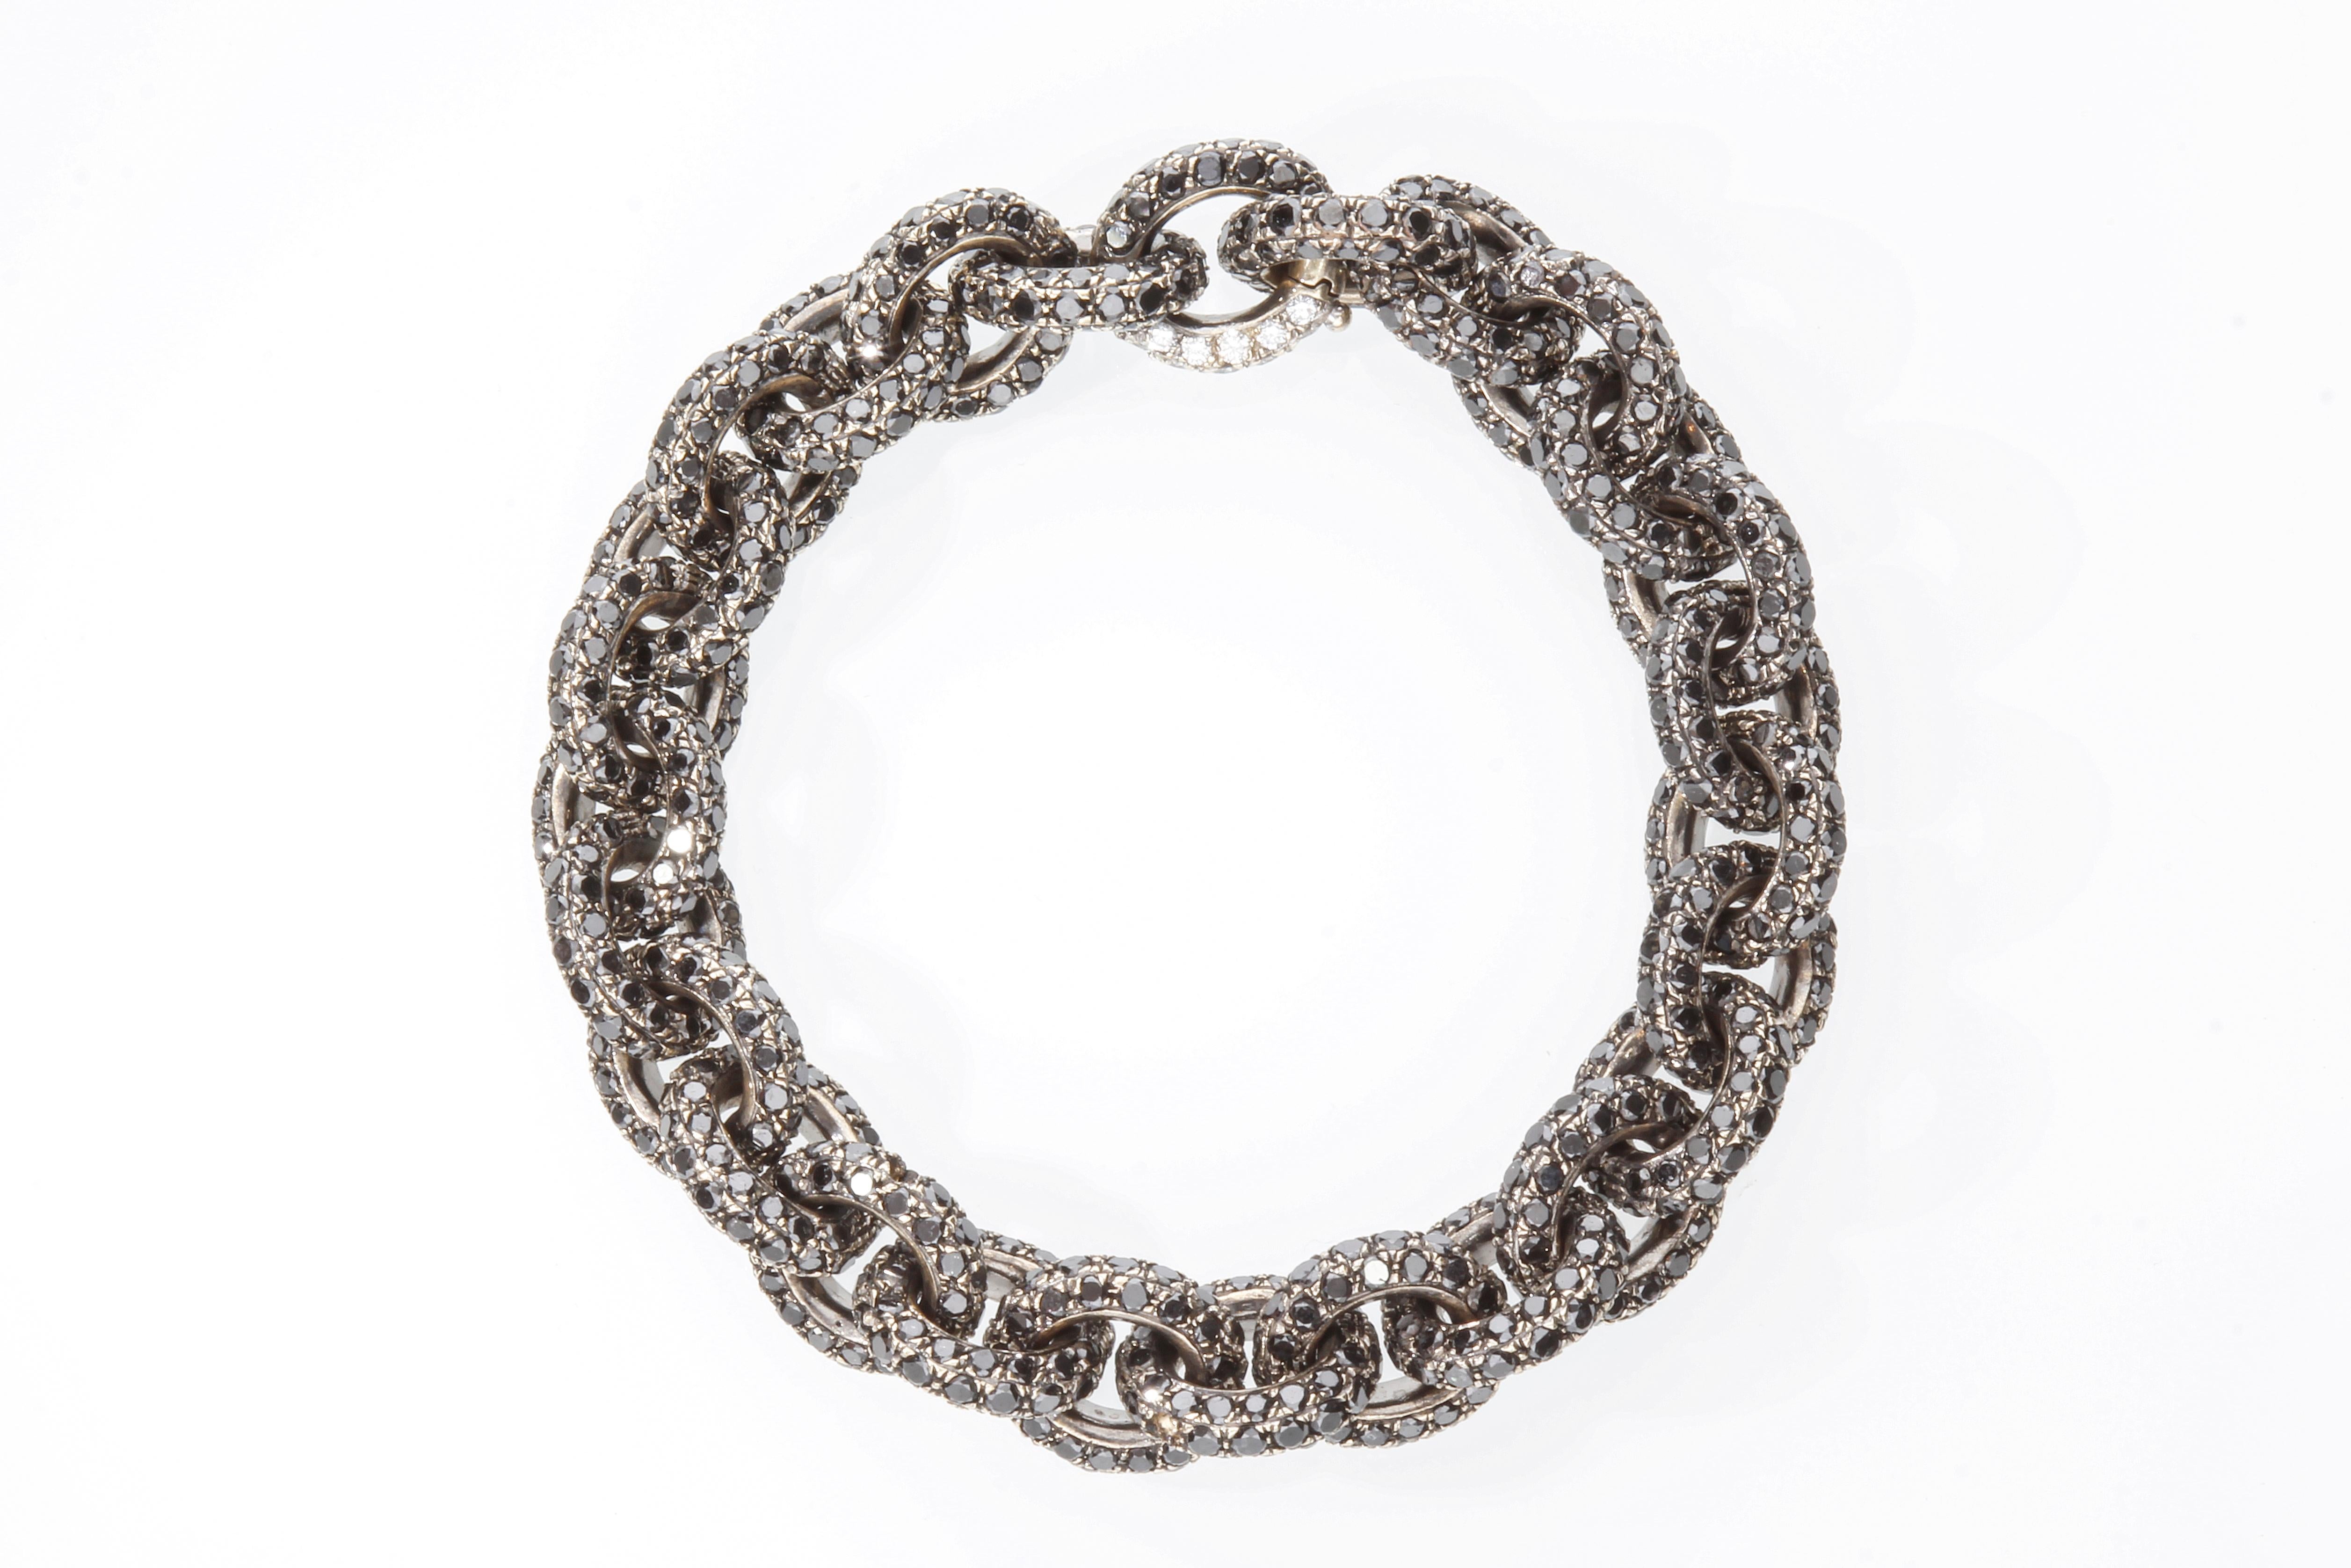 Chain Necklace/Bracelet with 64.26 Ct of White and Black Diamonds. Handmade. For Sale 8